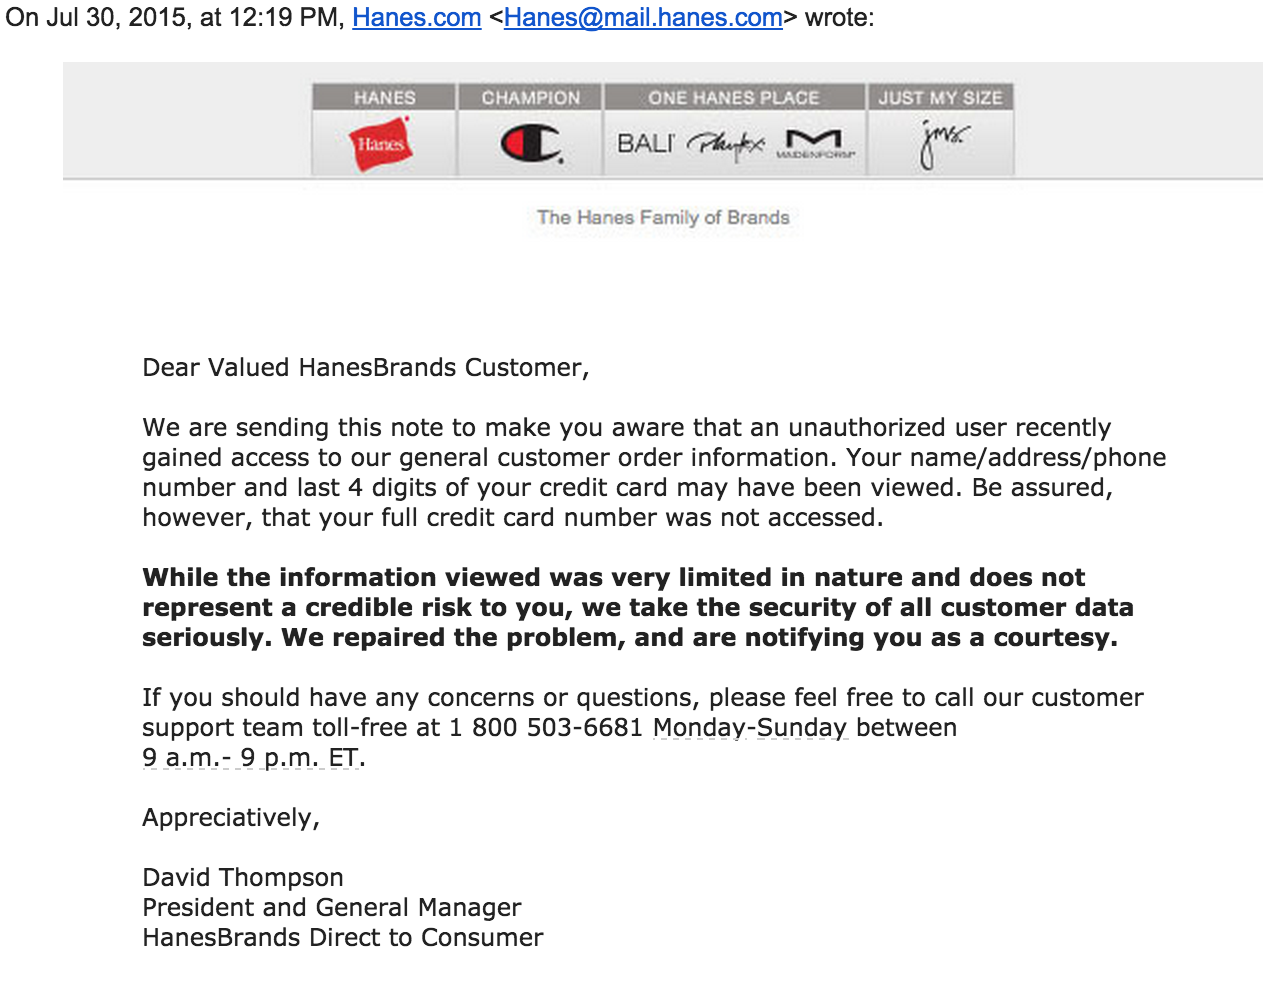 Hanes Website Is The Latest, Oddest Victim Of Data Breach